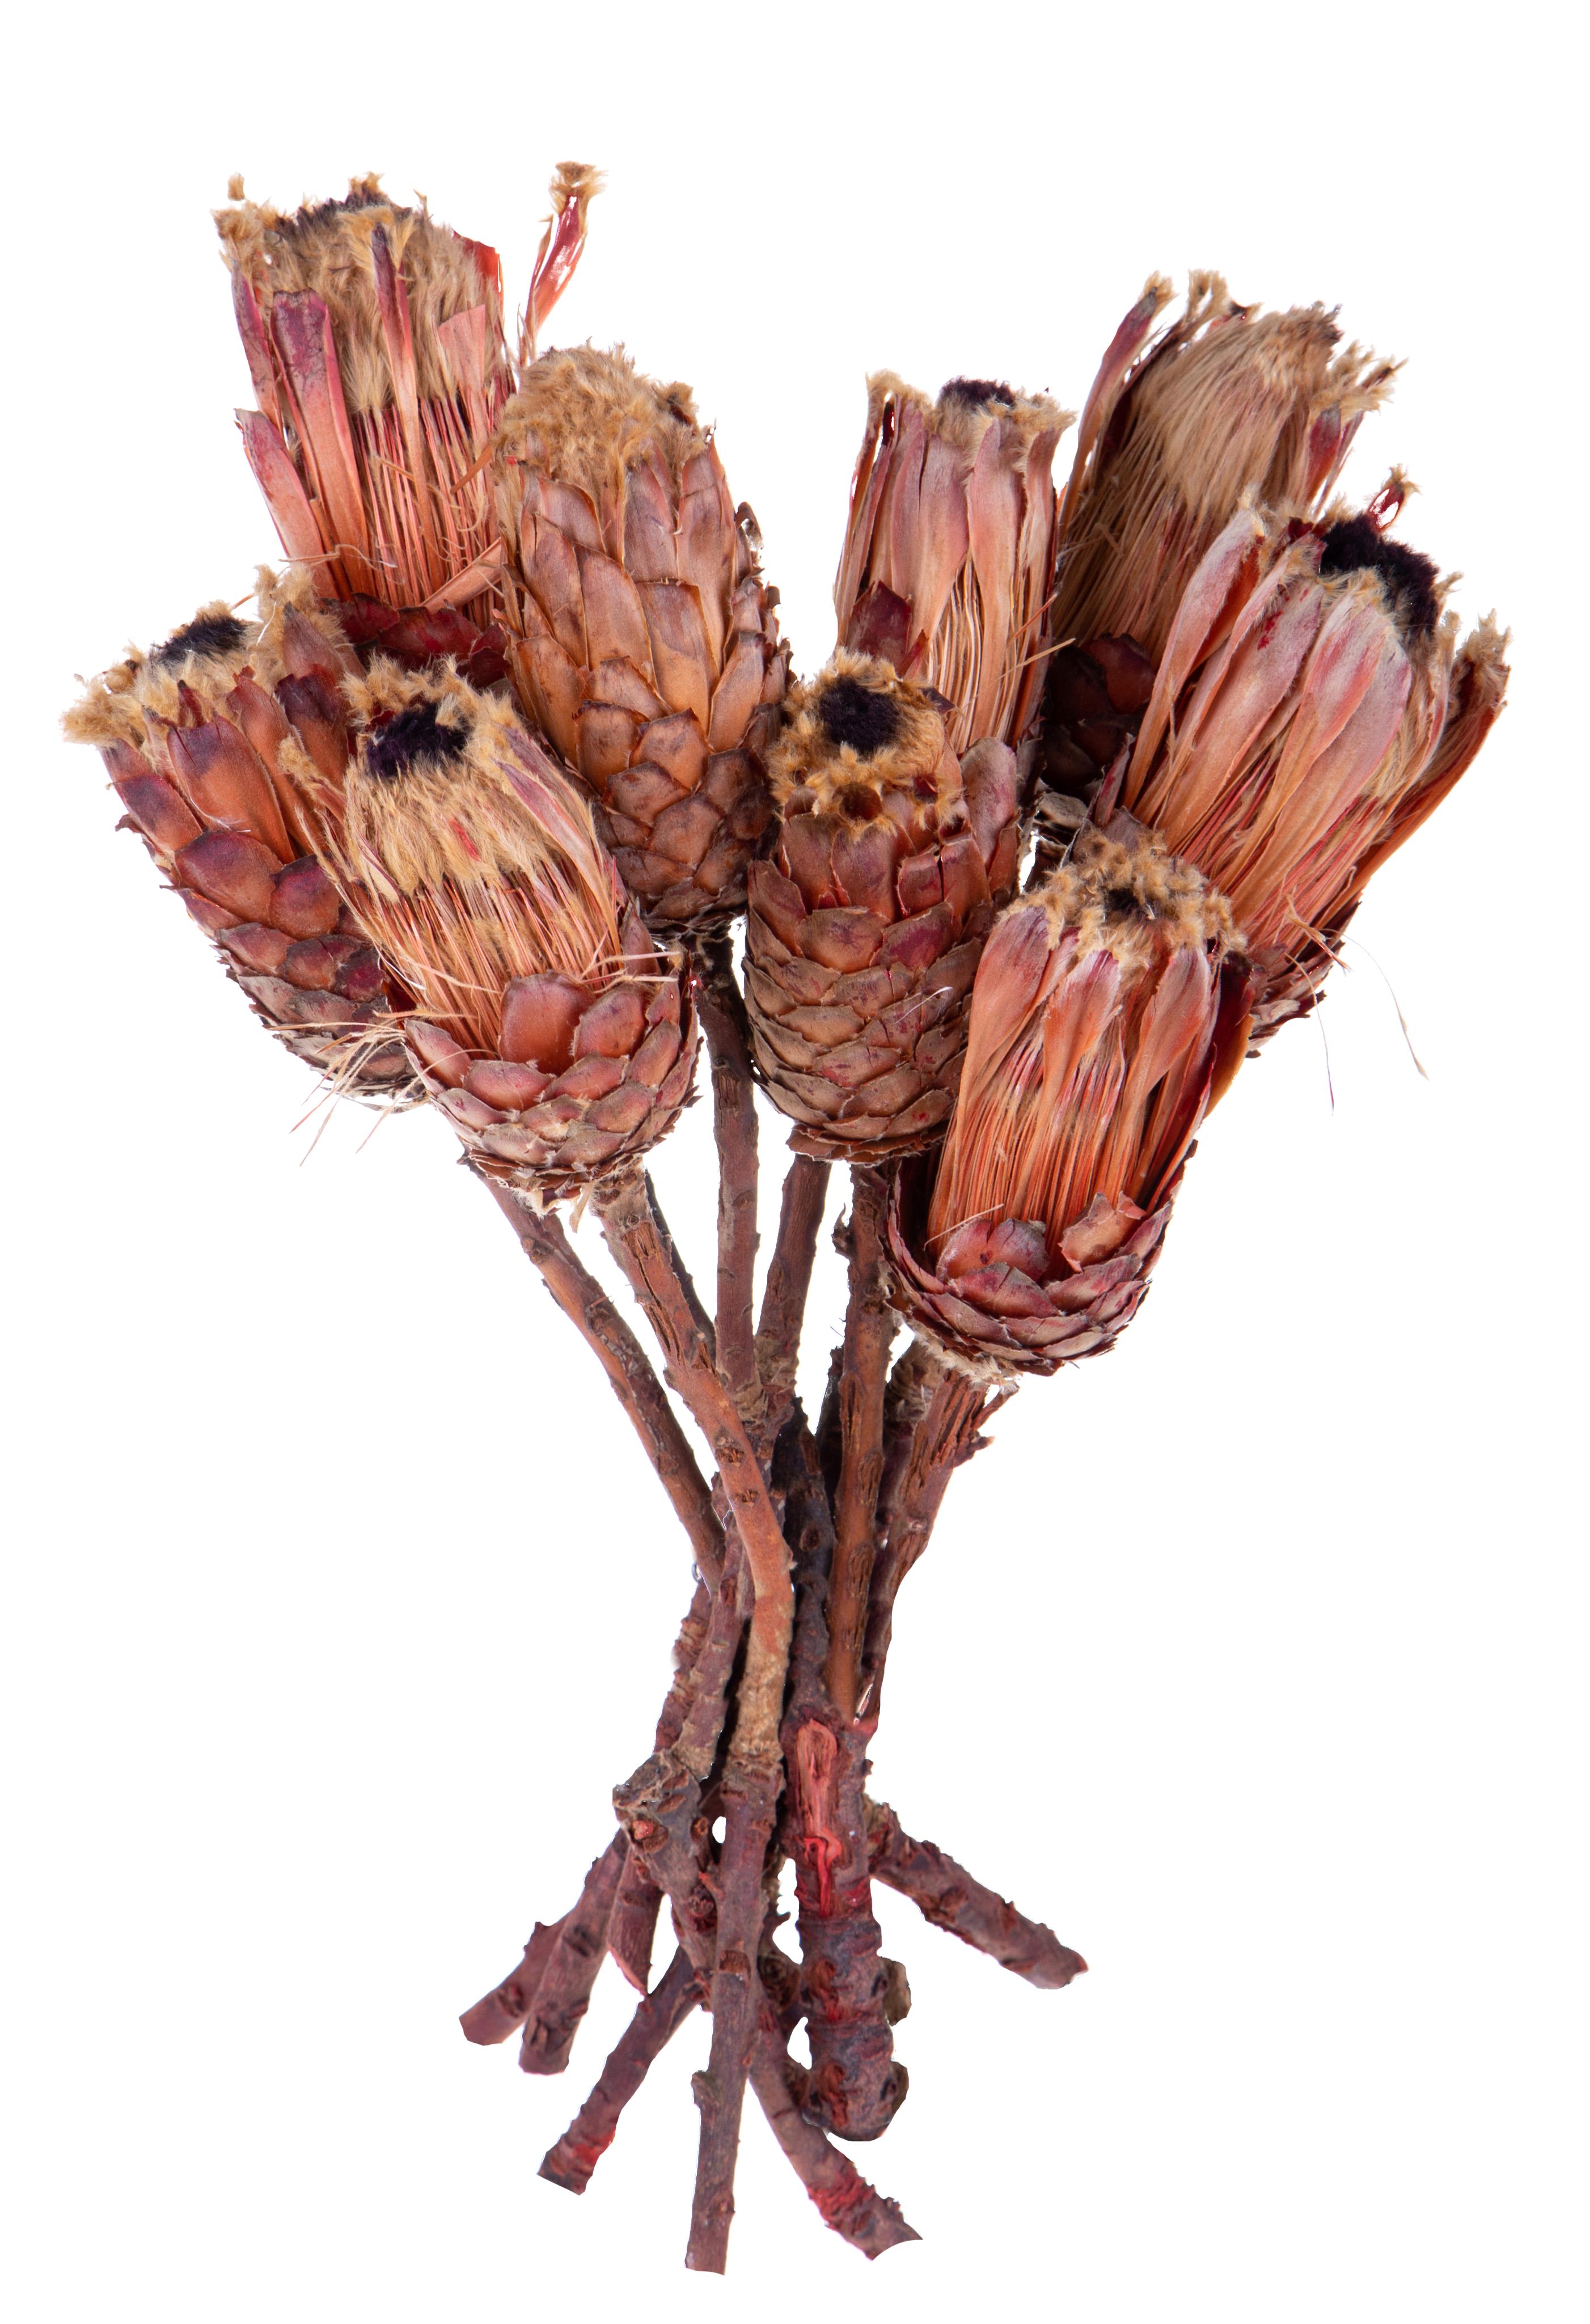 NATURAL PRODUCTS DRIED FLOWERS AND ERBS, FLOWERS, FRUITS AND NATURAL PROTEES, BARBIGERA MAGNIFICA 1 PZ 40 CM MEDIUM